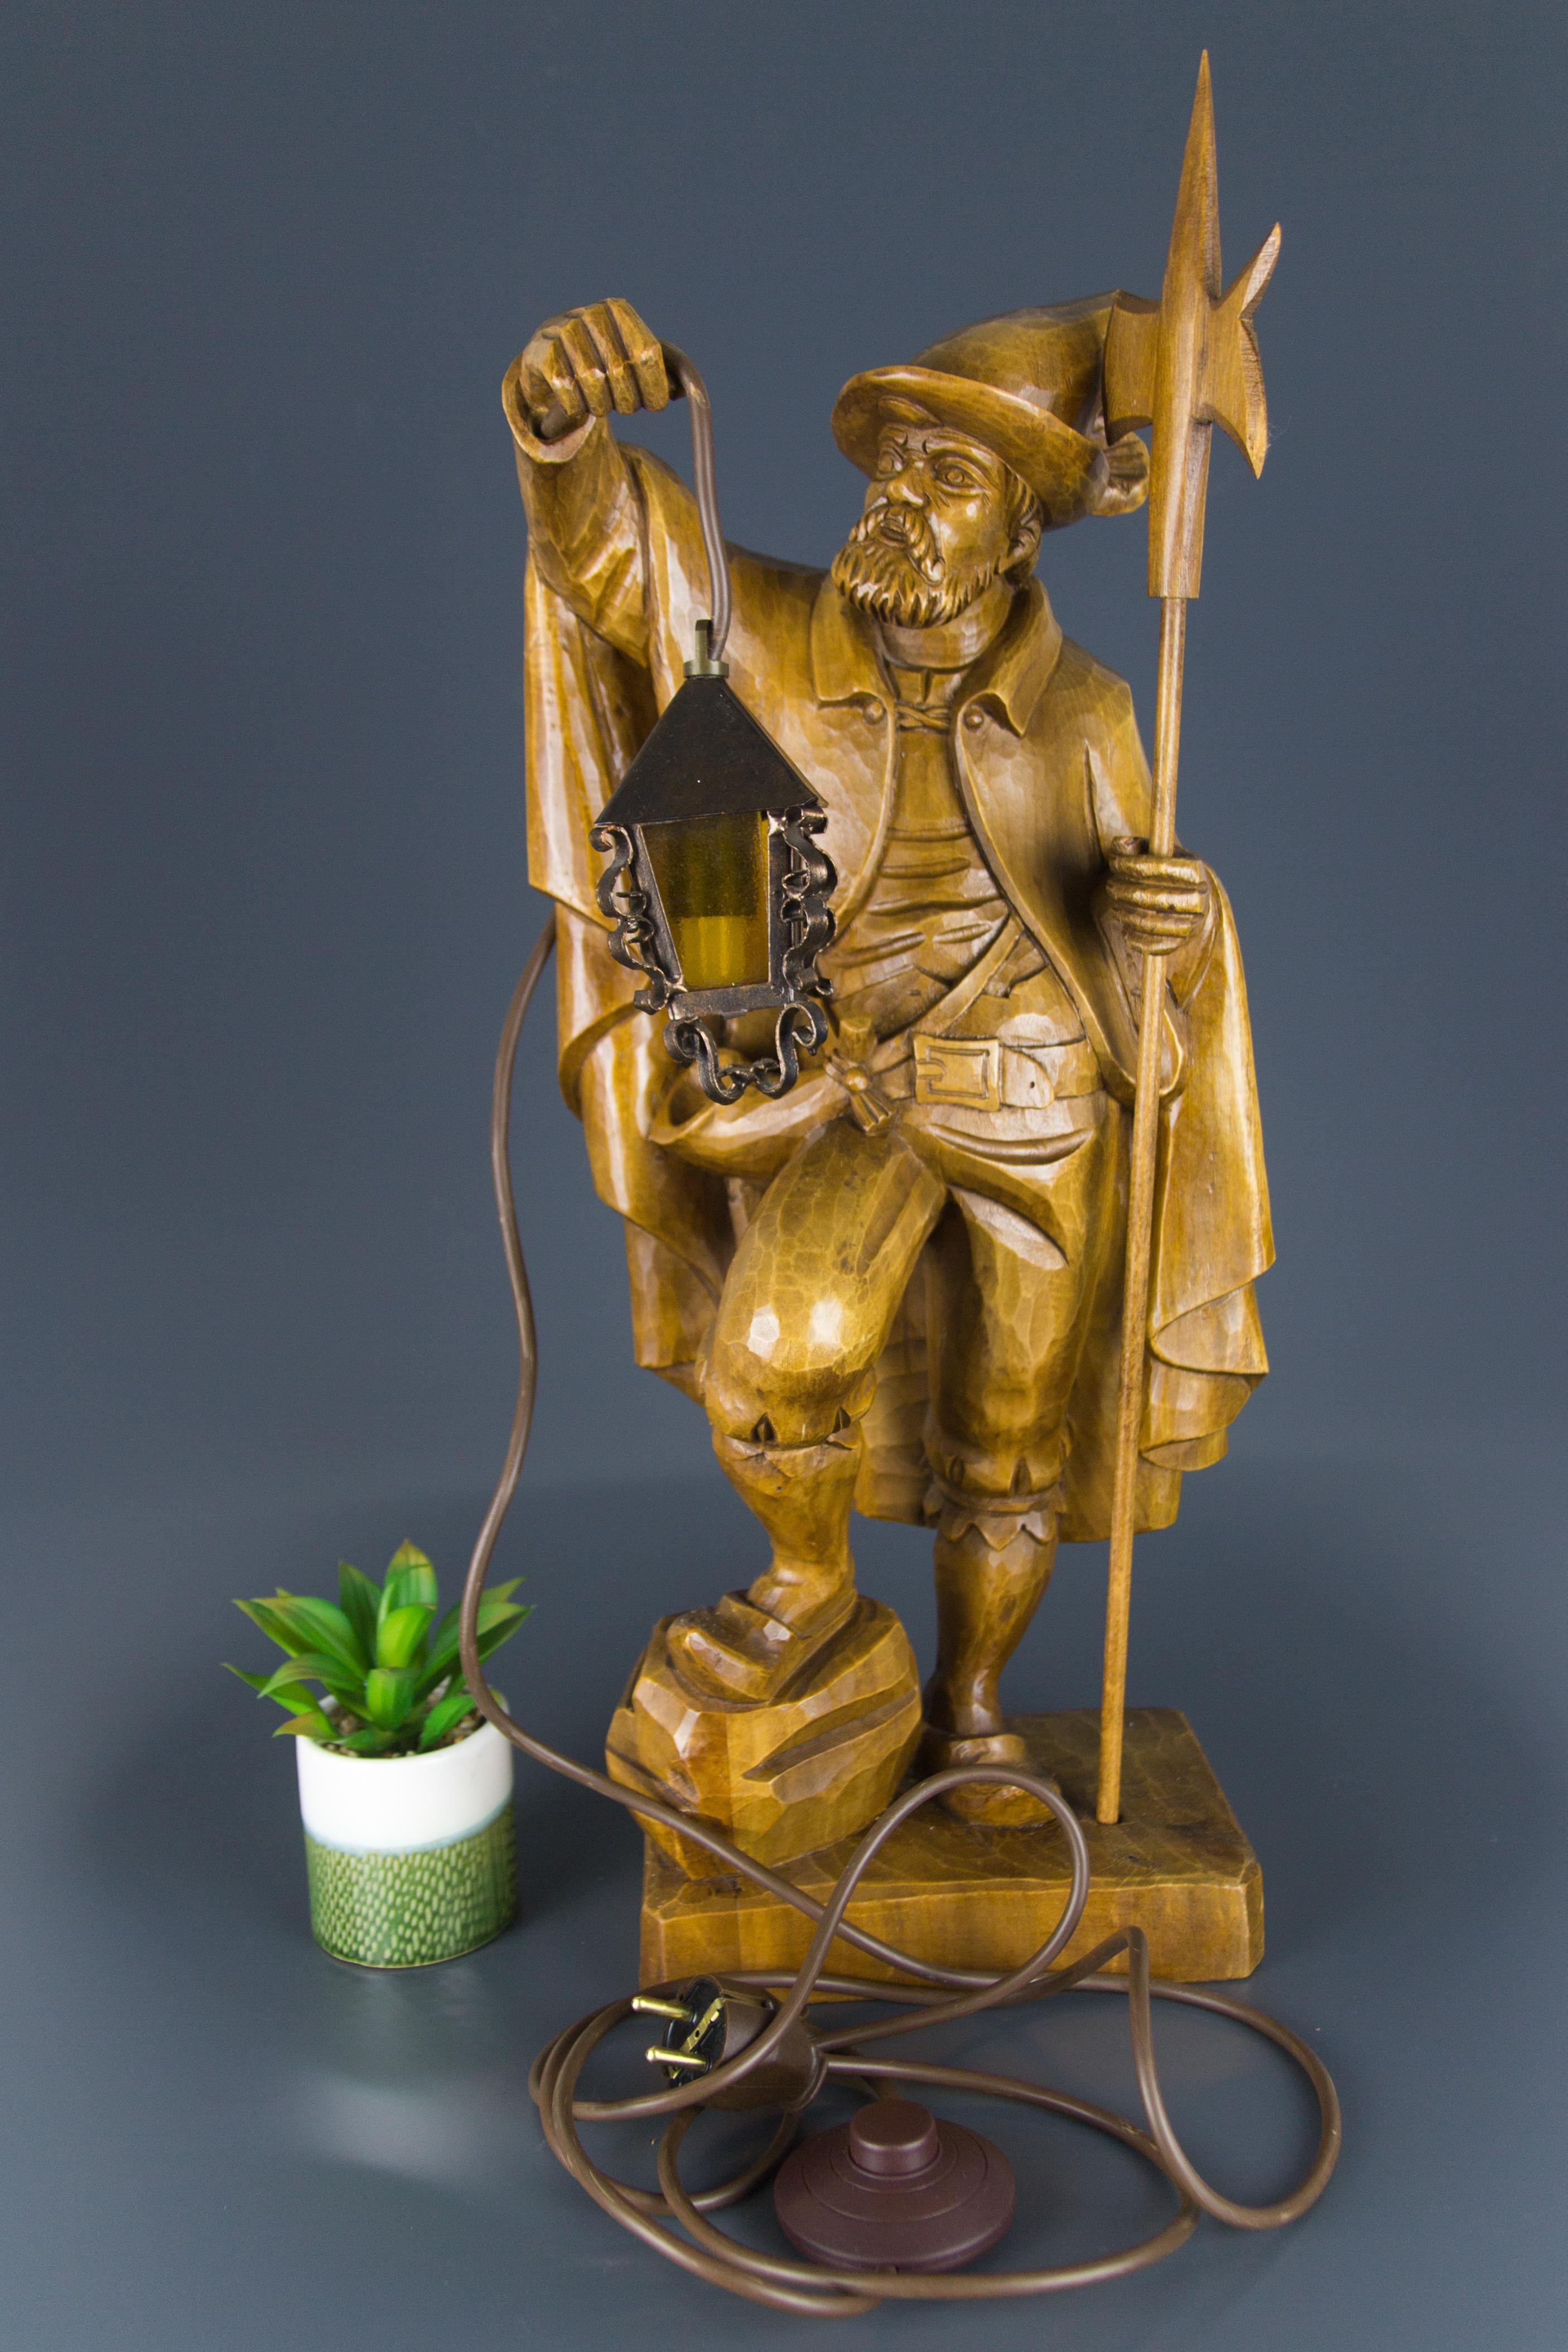 German Hand Carved Wooden Figurative Sculpture Lamp Night Watchman with Lantern 11